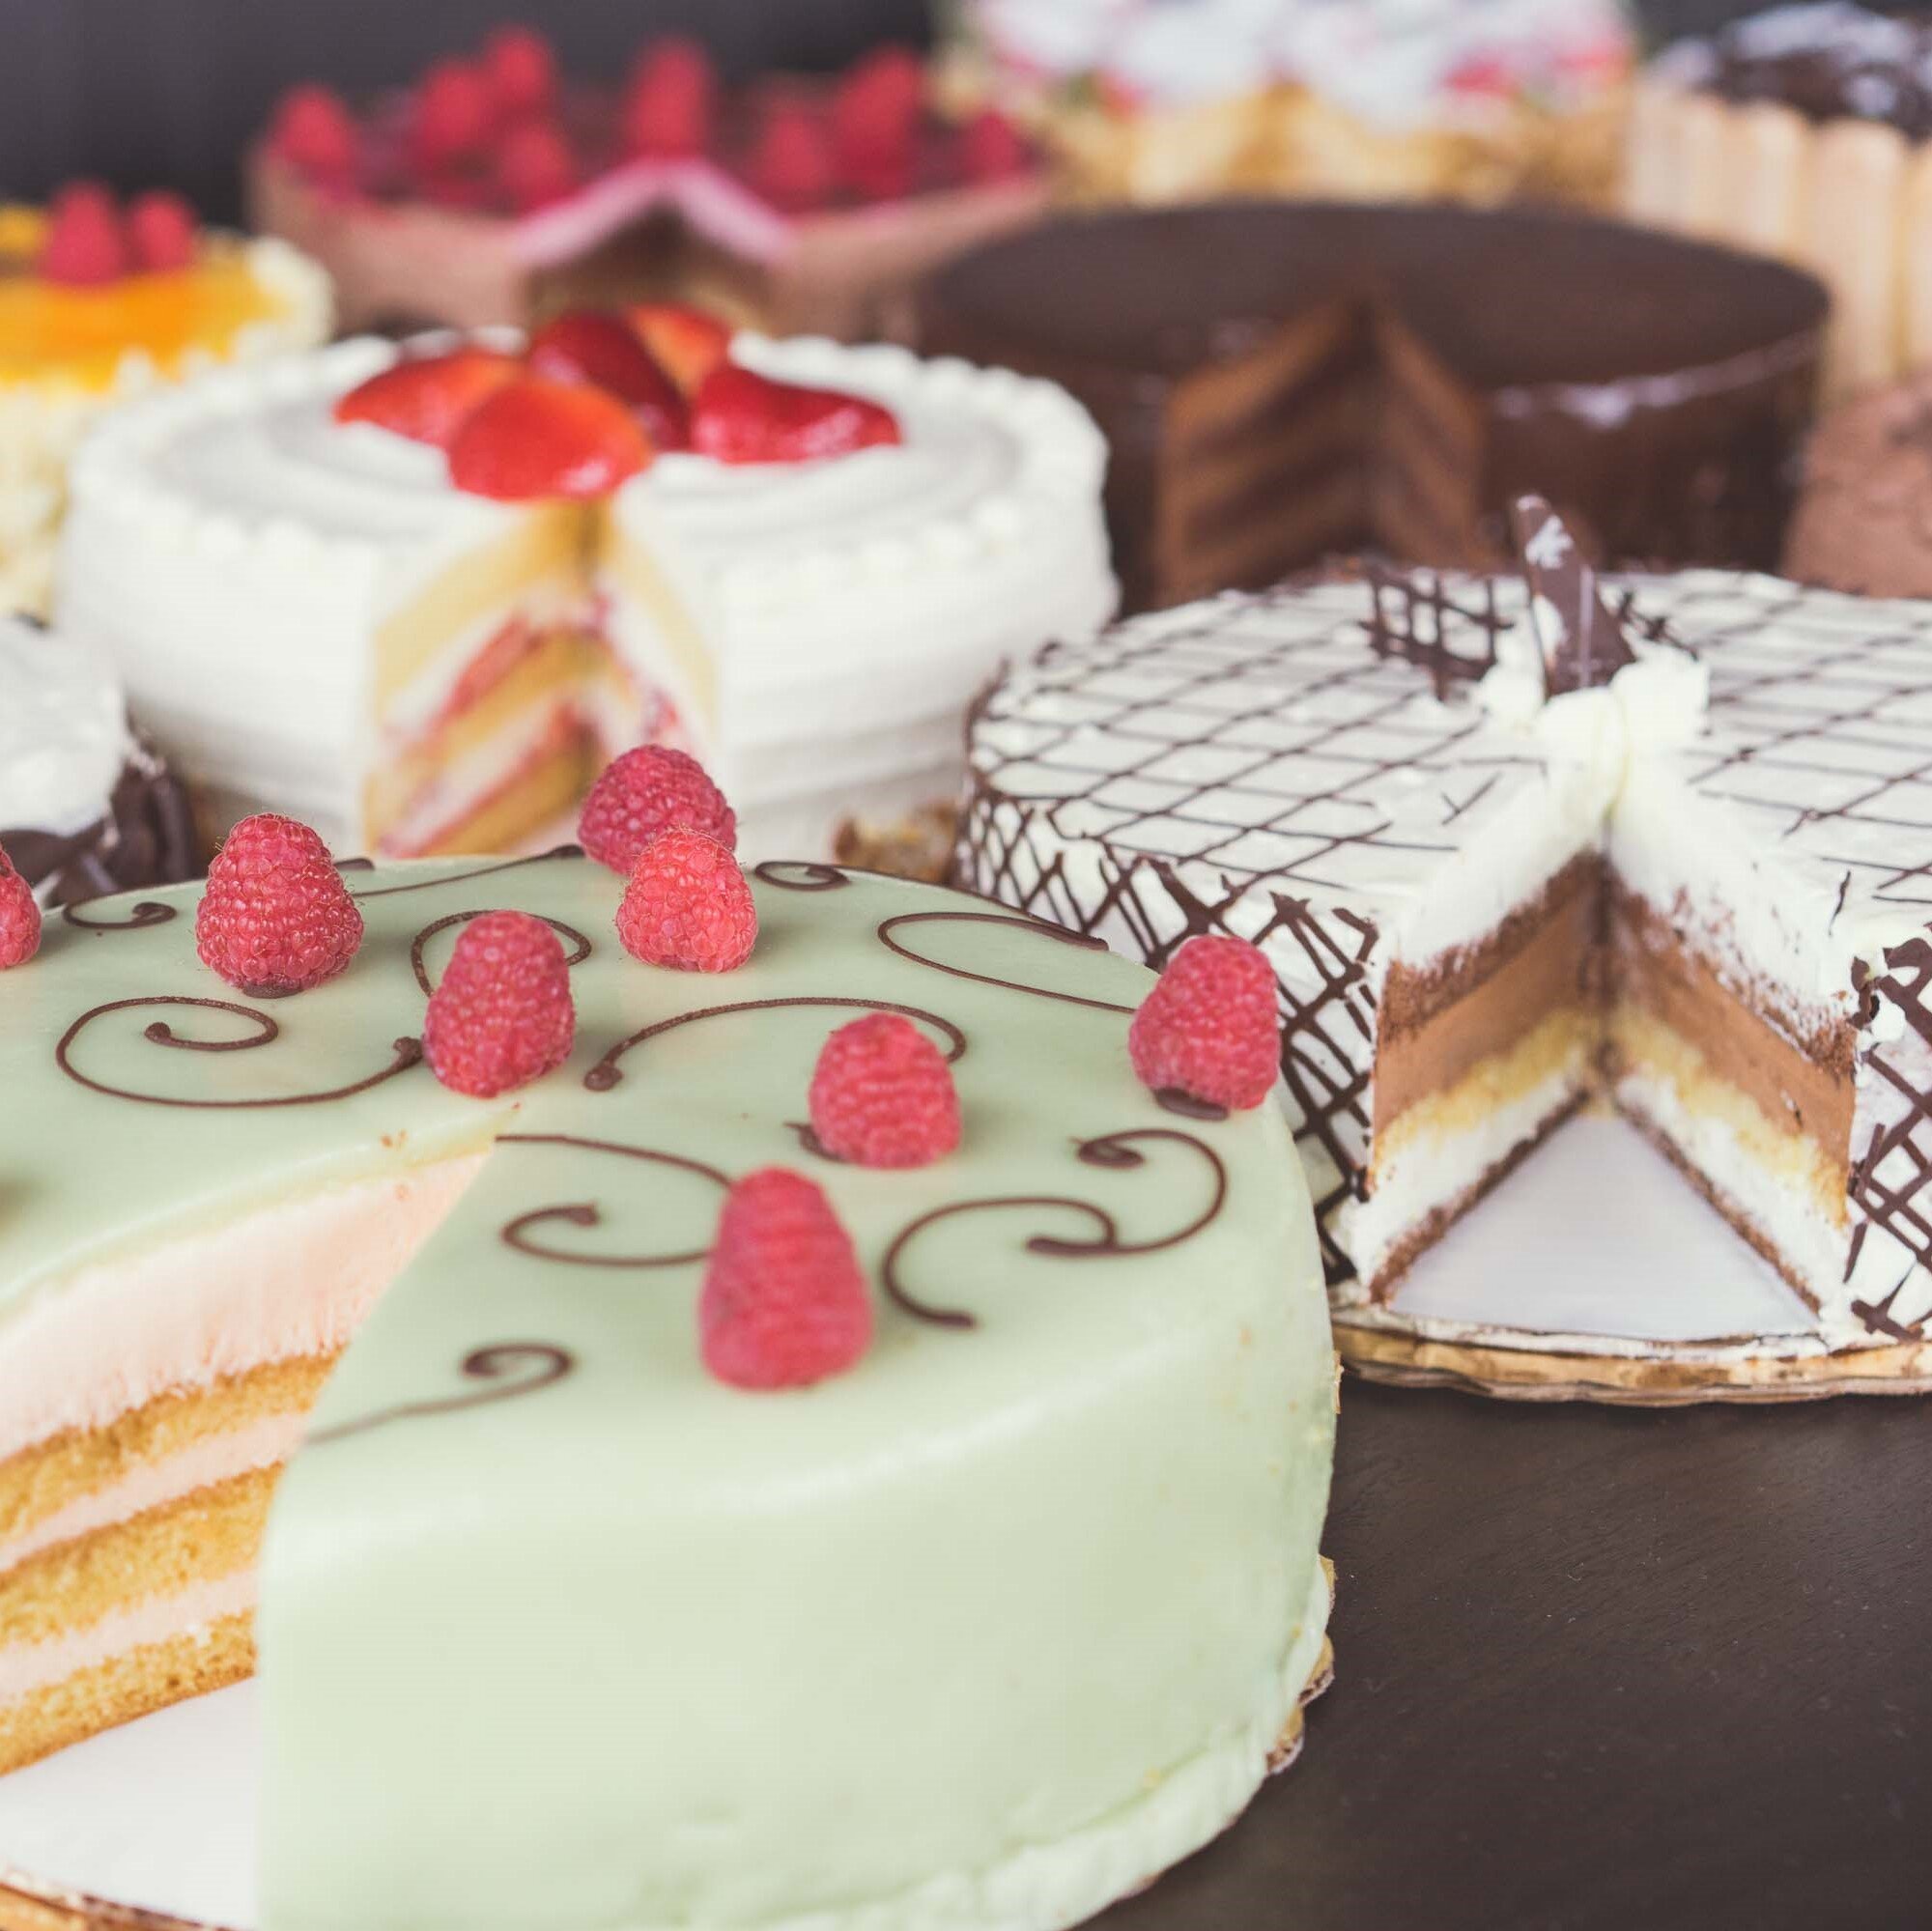 Discover 63+ gourmandise cakes latest